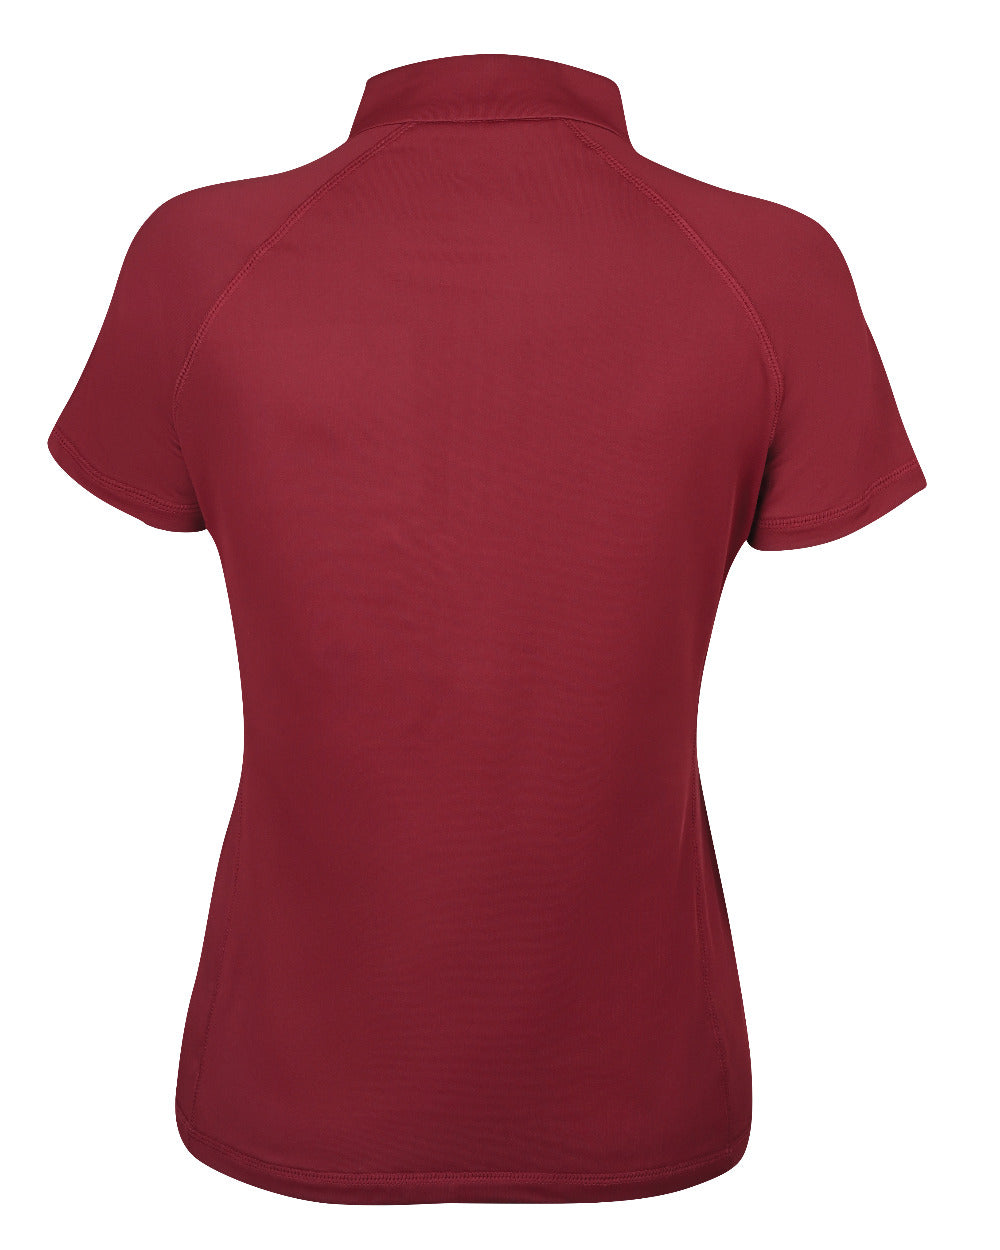 Maroon Coloured WeatherBeeta Prime Short Sleeve Top On A White Background 